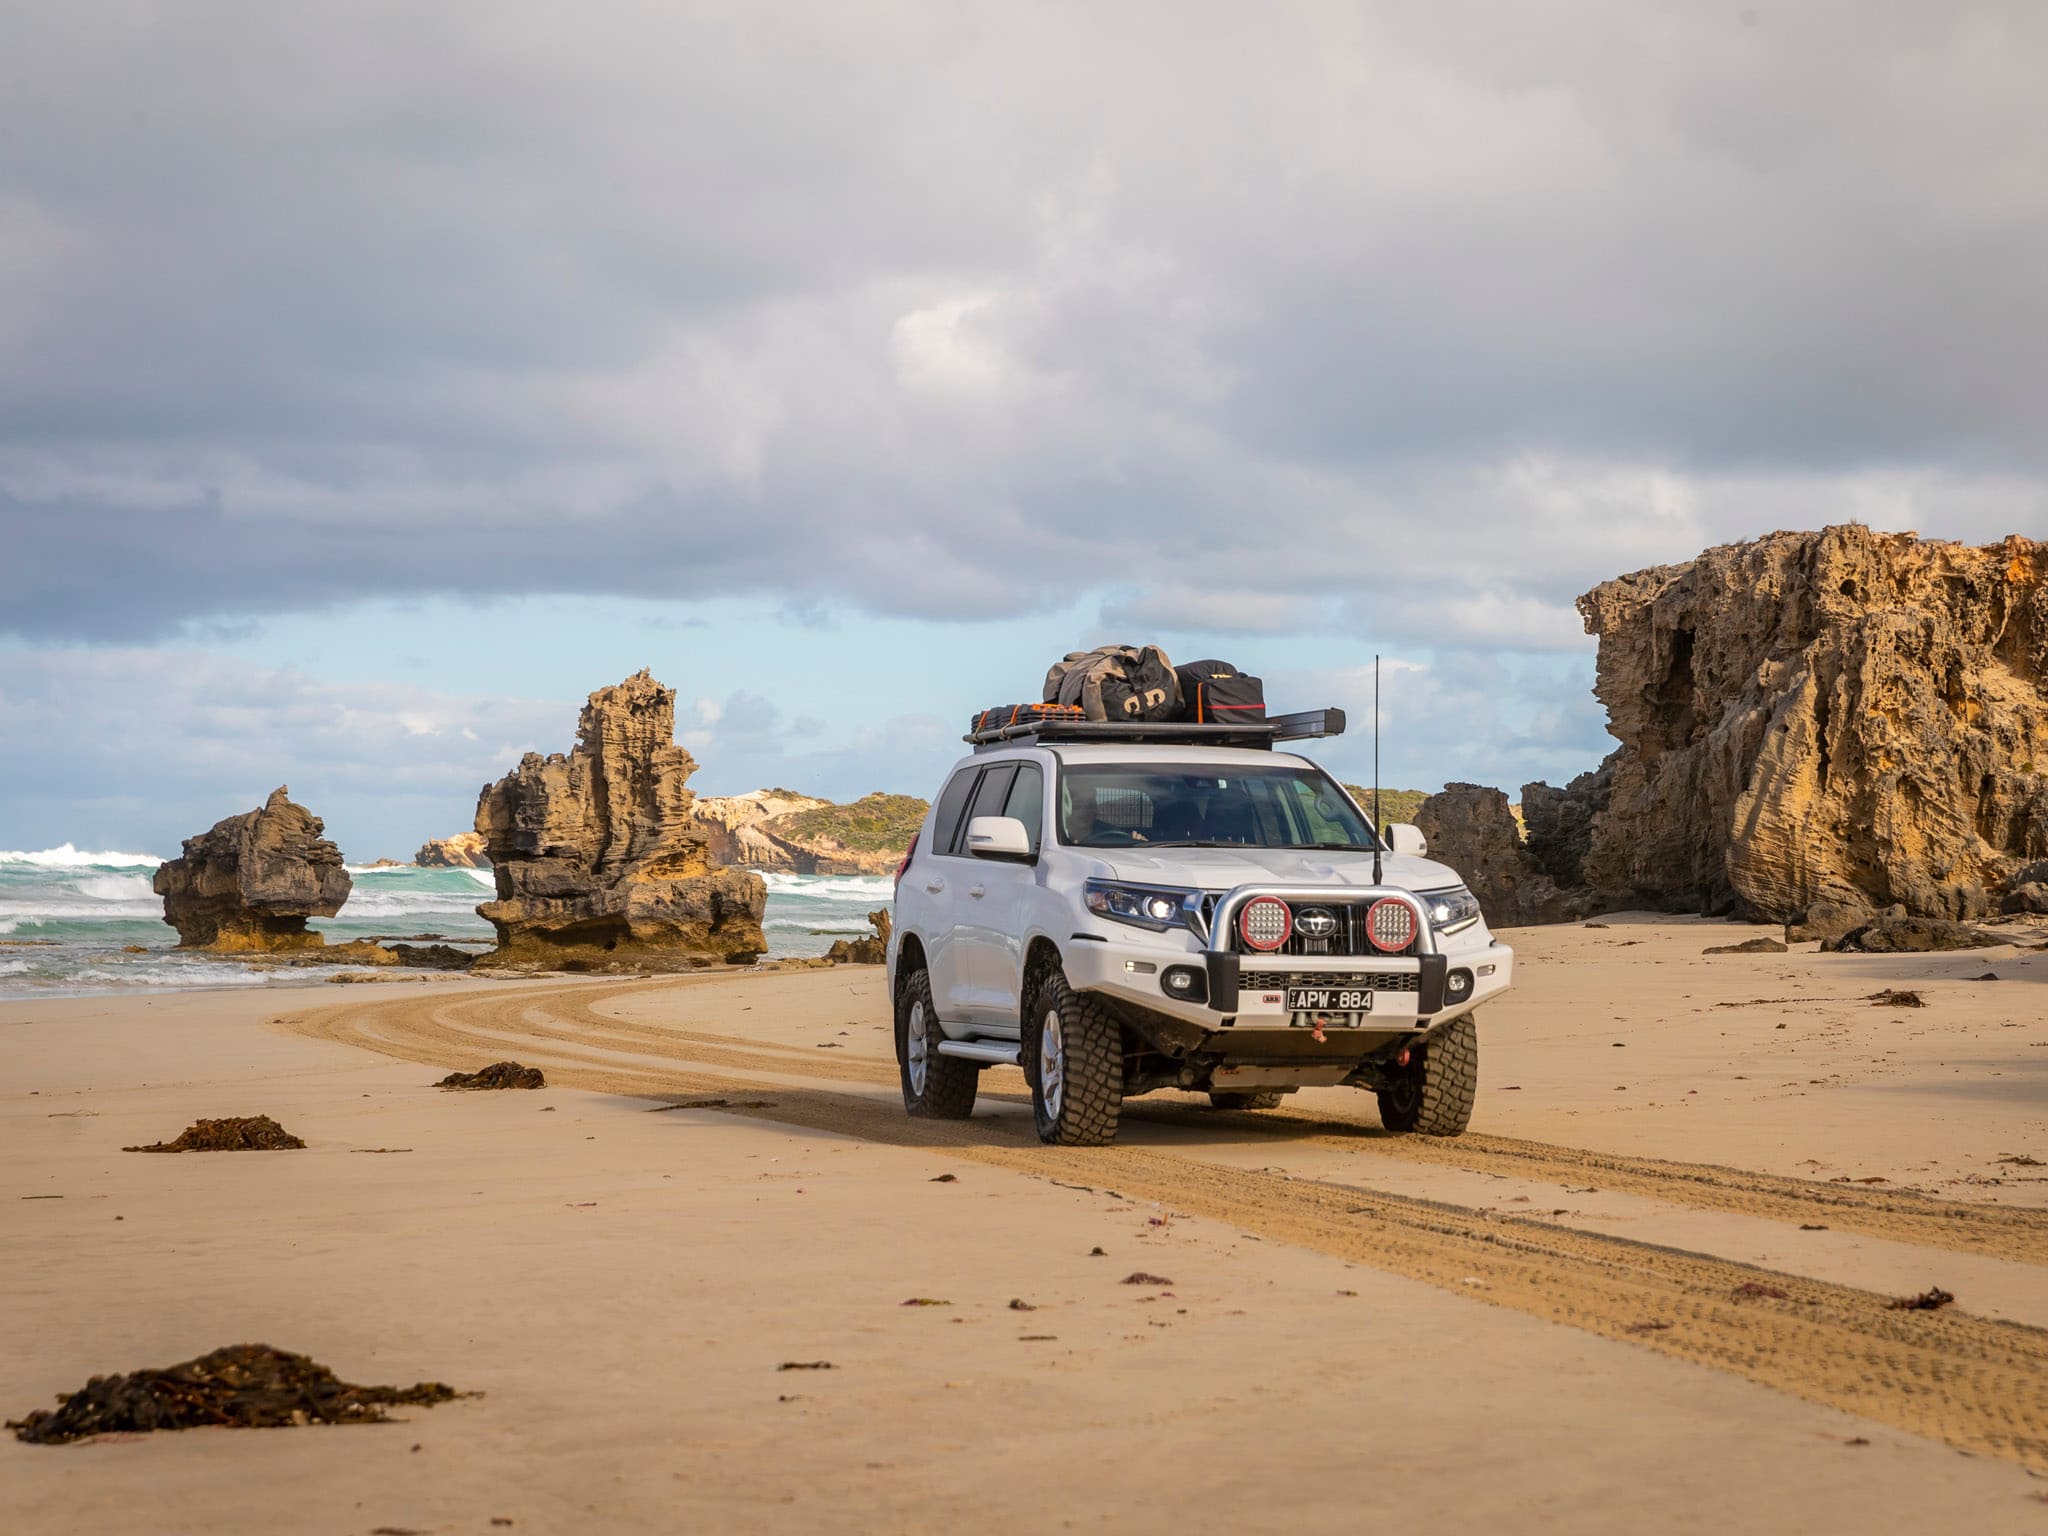 Beachport Conservation Park (Offroad Images)